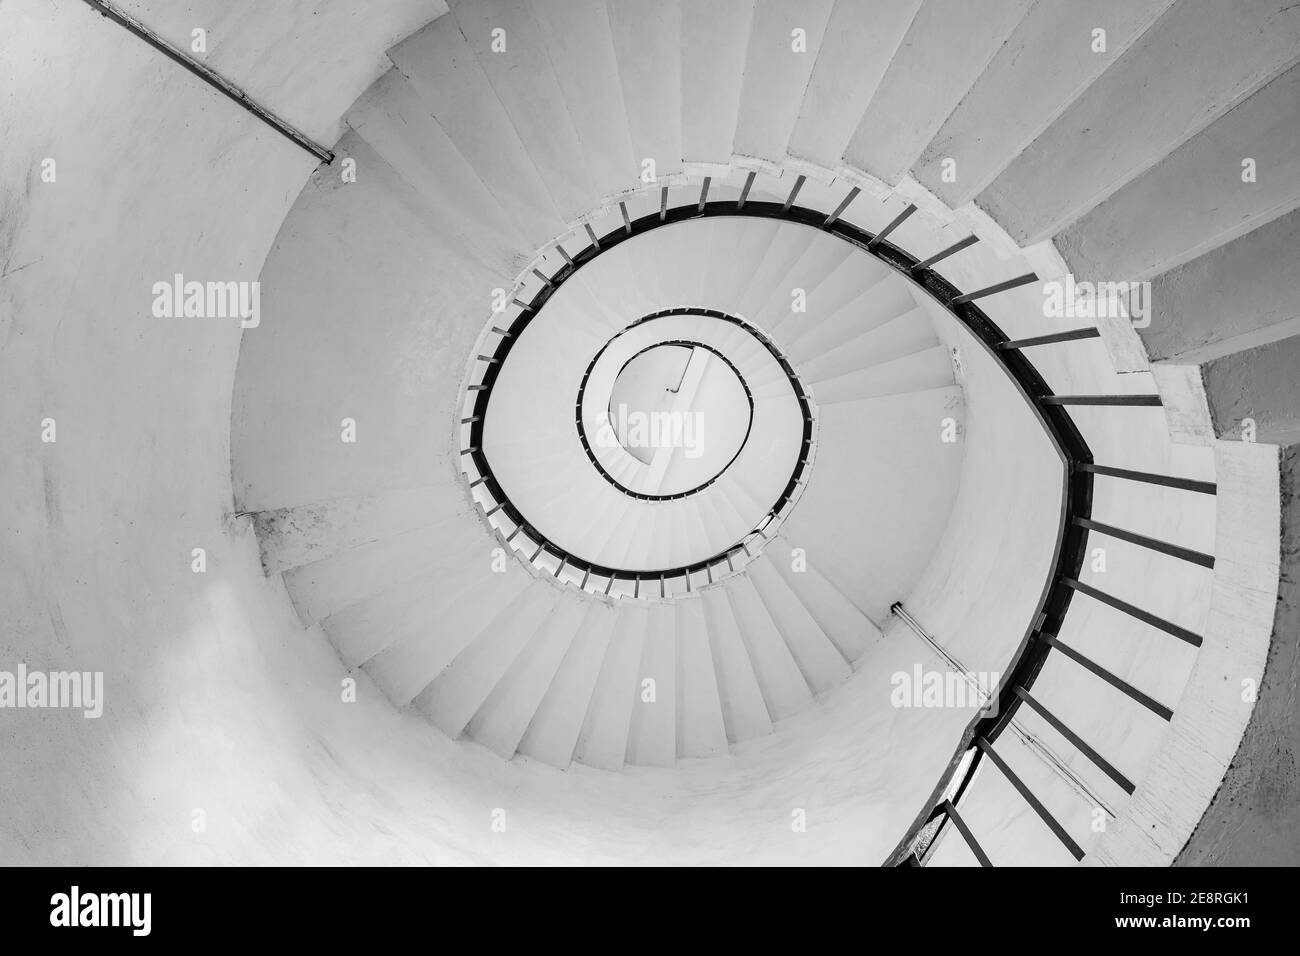 Spiral staircase in black and white. Stock Photo